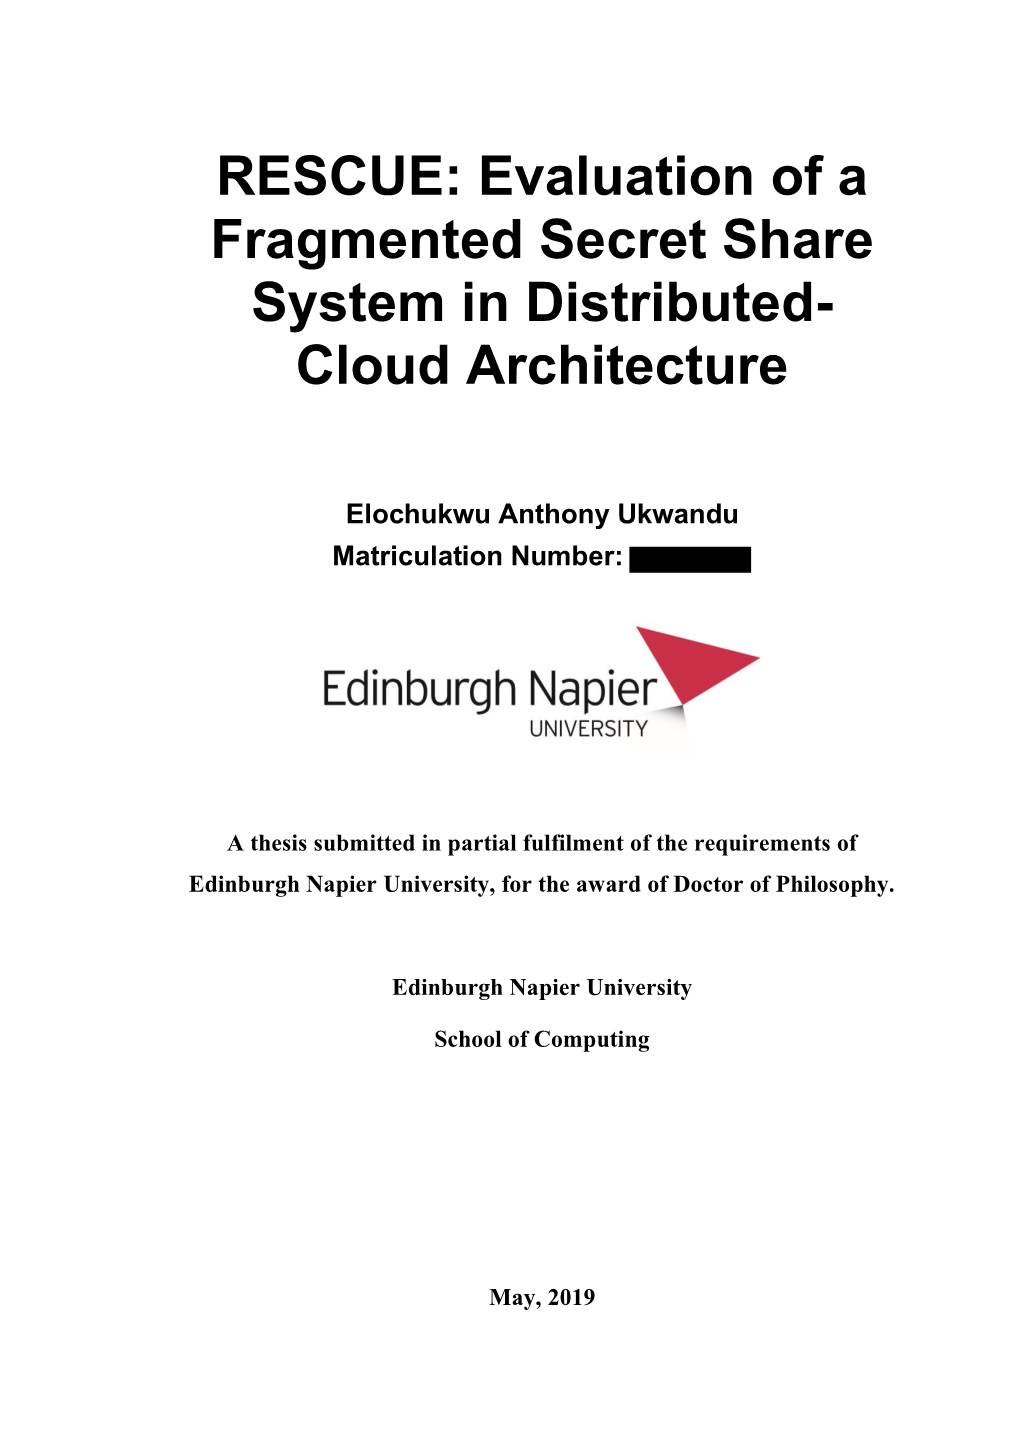 RESCUE: Evaluation of a Fragmented Secret Share System in Distributed- Cloud Architecture